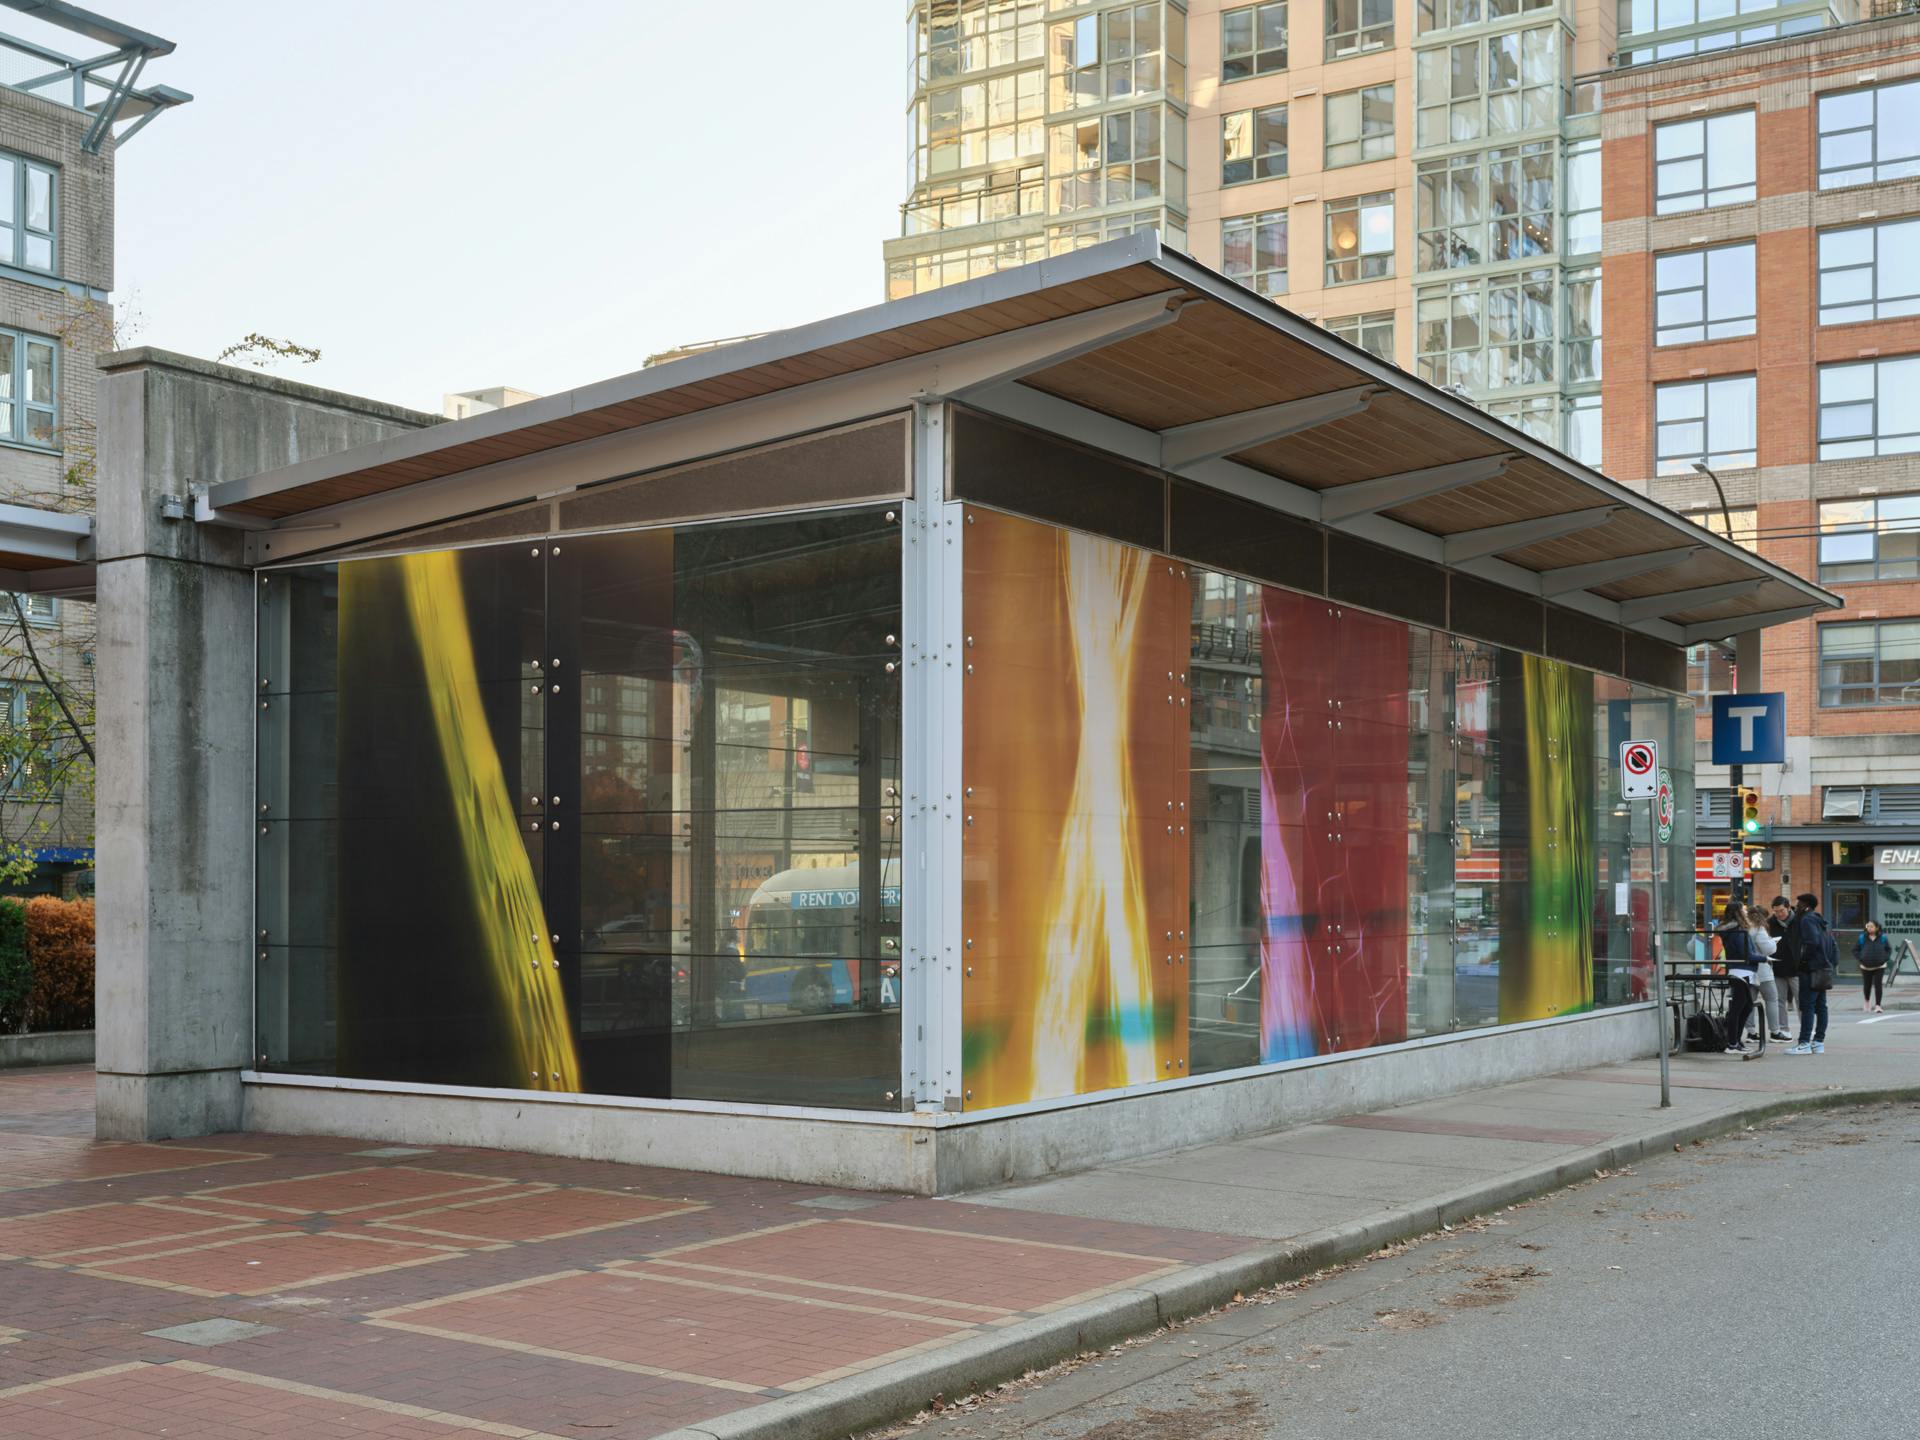 A diagonal view of a SkyTrain station with four photograms in its windows, each depicting various forms of nylon mesh bags against neon photographic paper.